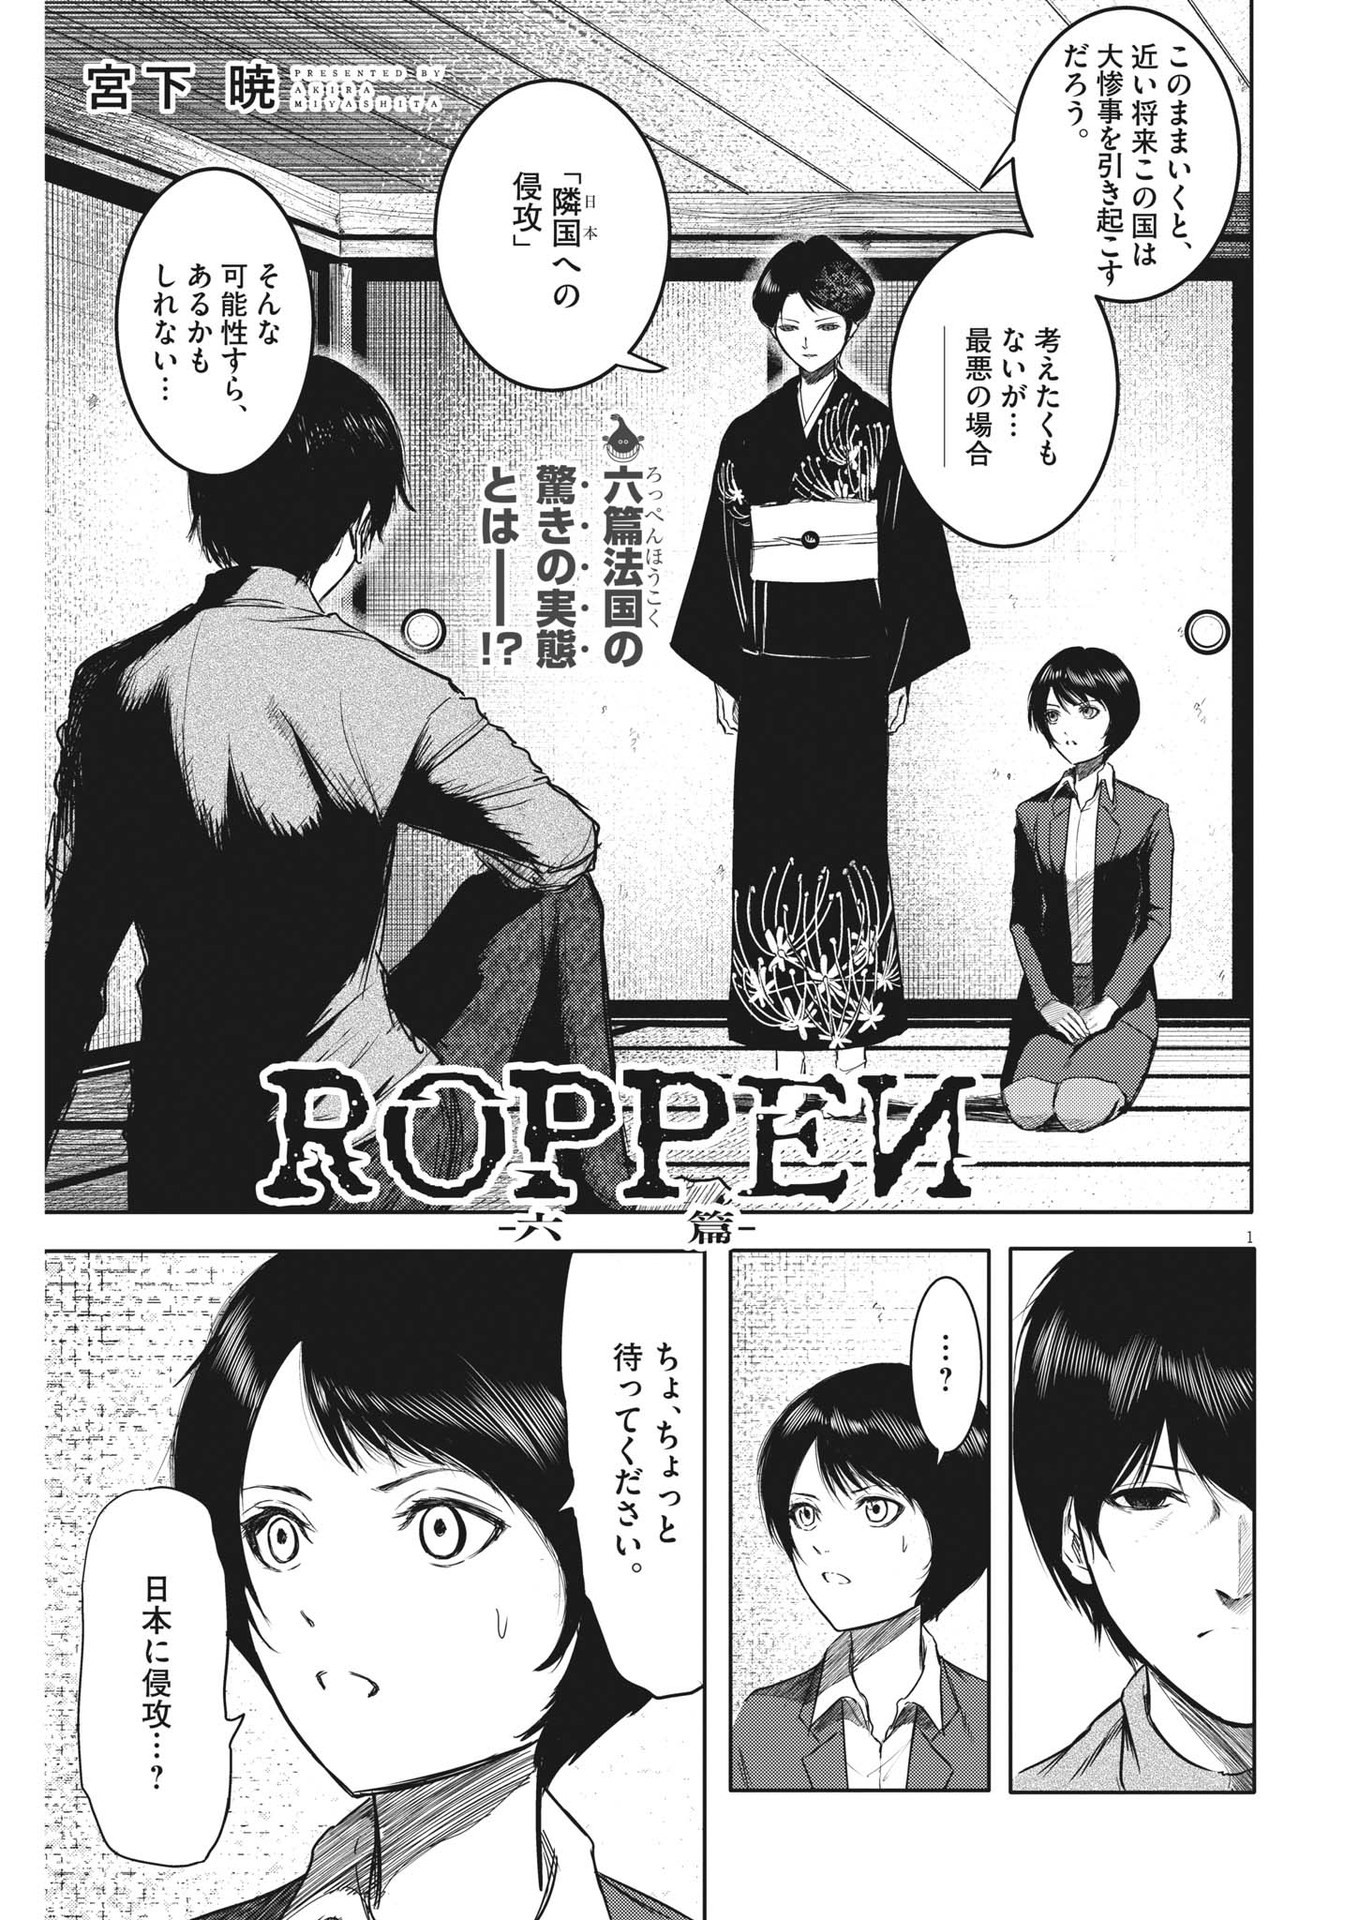 Roppen - Chapter 9 - Page 1